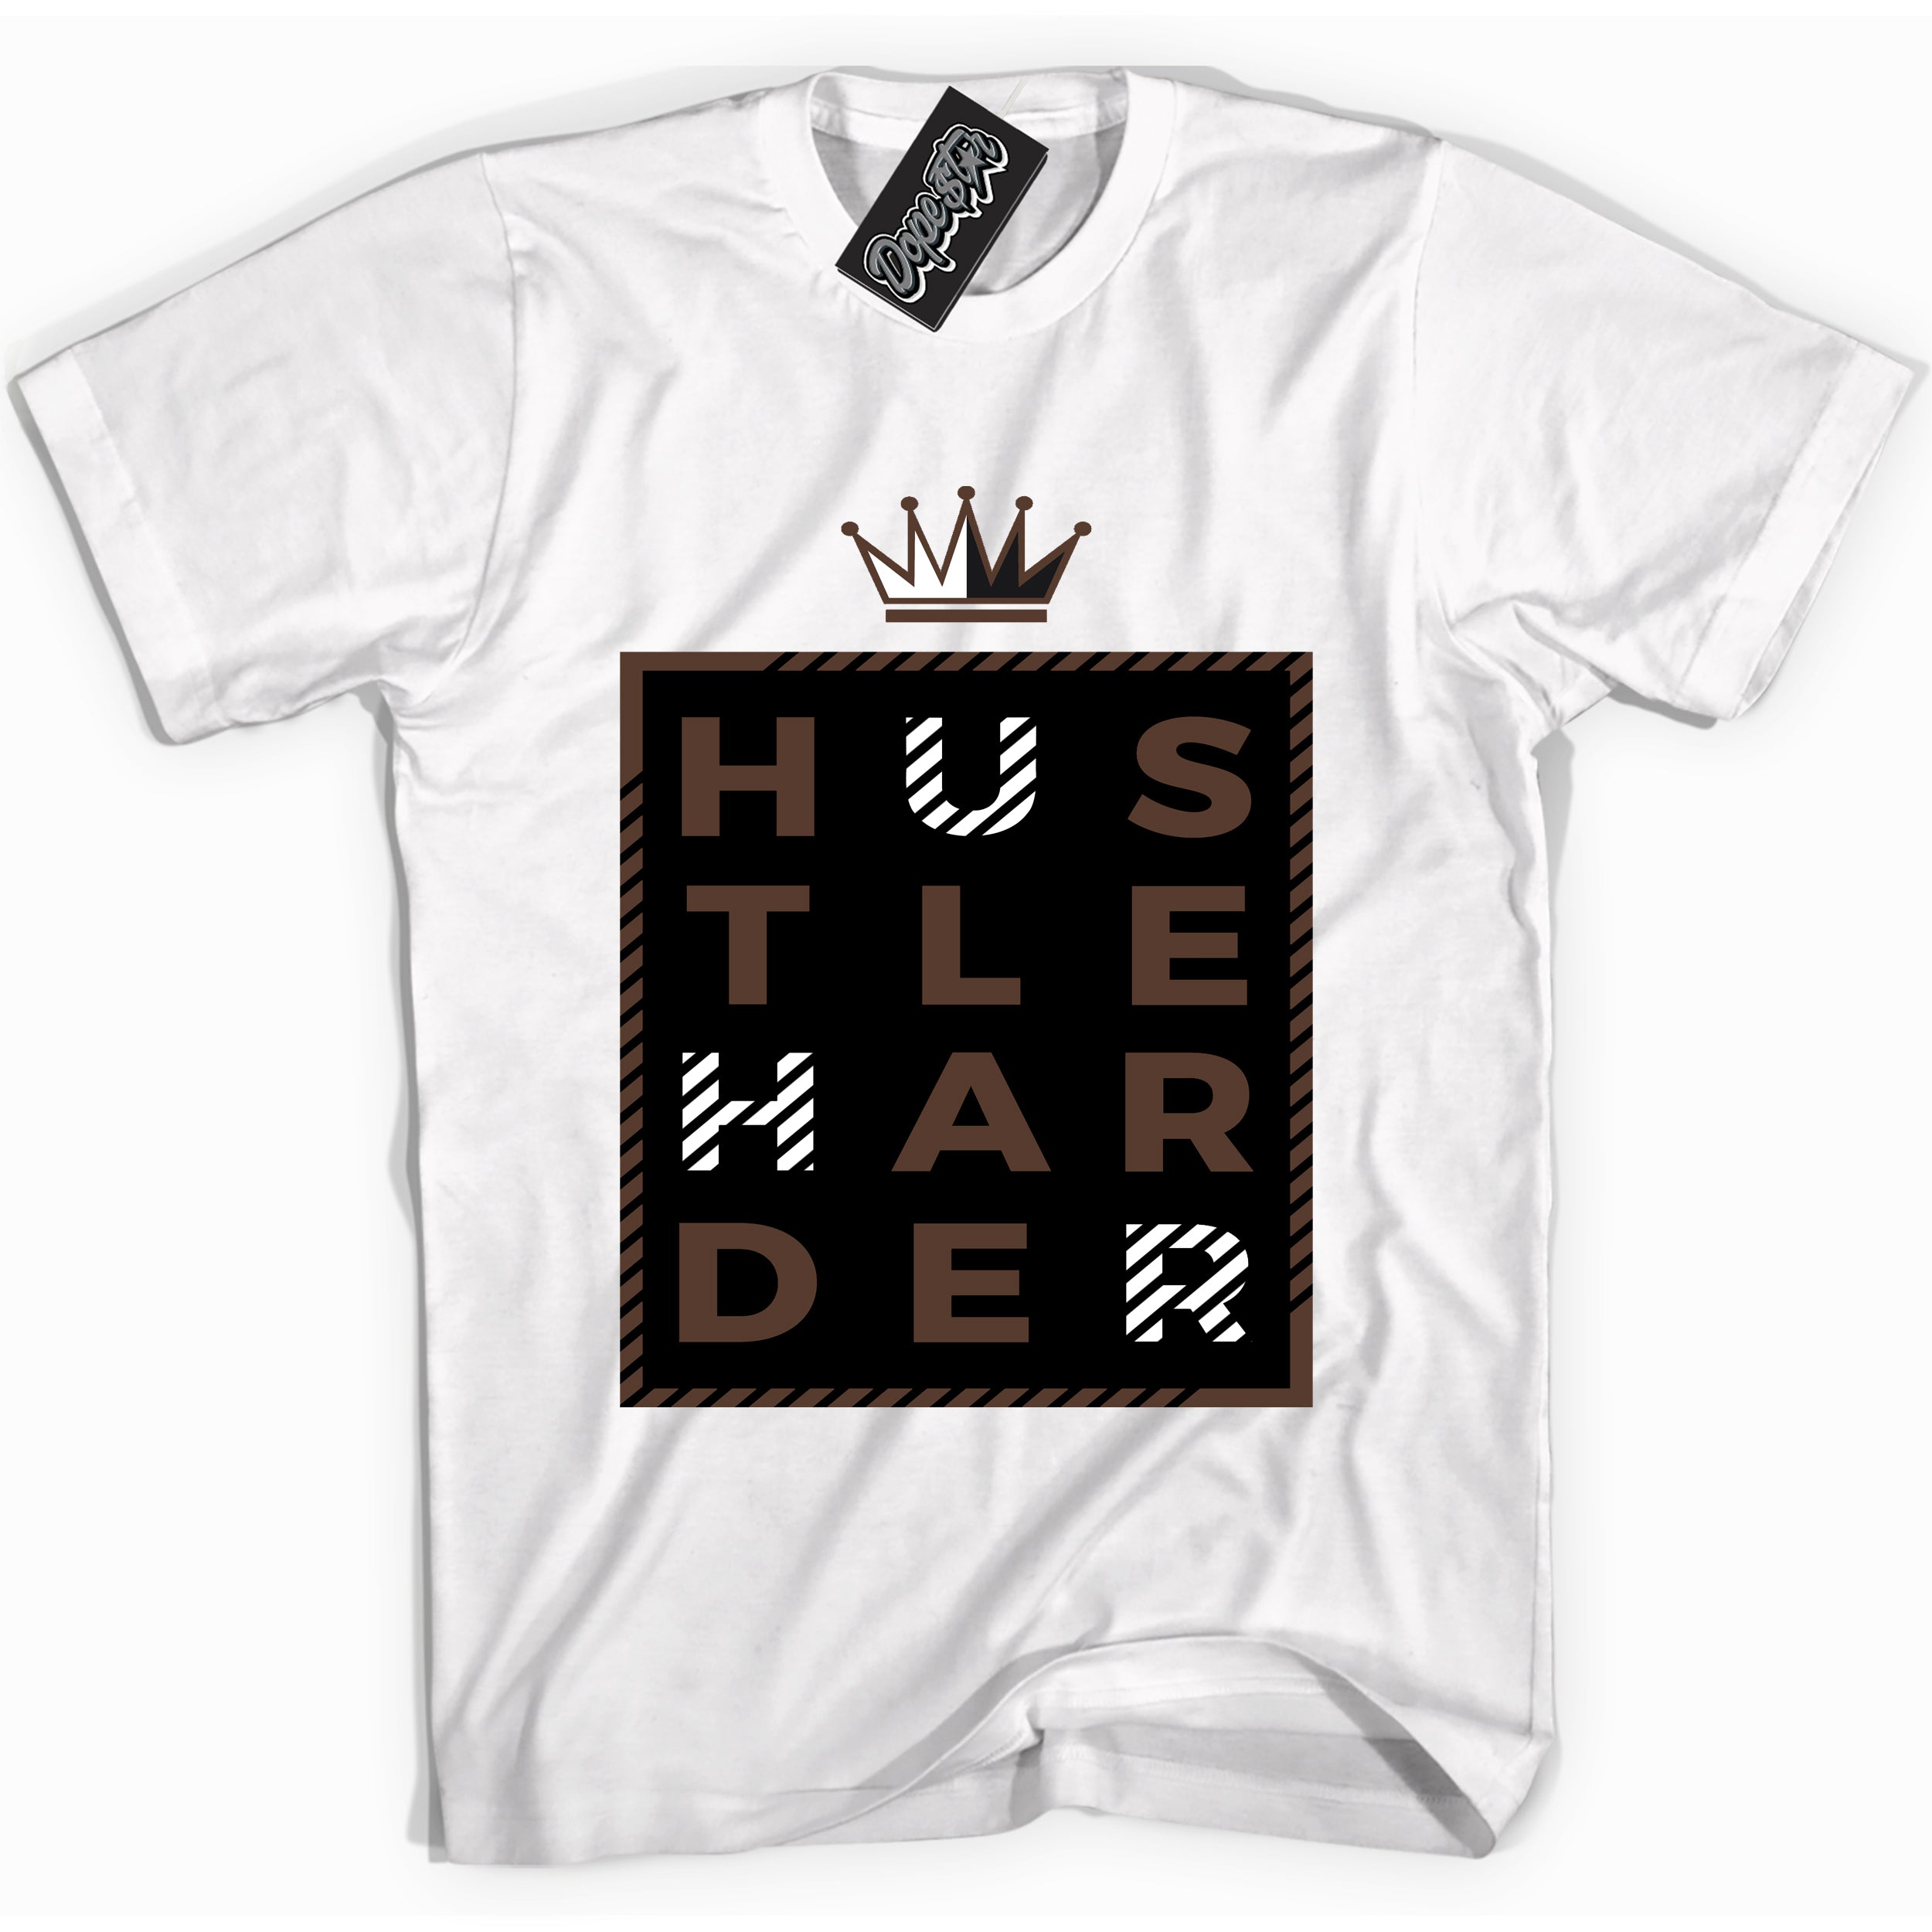 Cool White graphic tee with “ Hustle Harder ” design, that perfectly matches Palomino 1s sneakers 